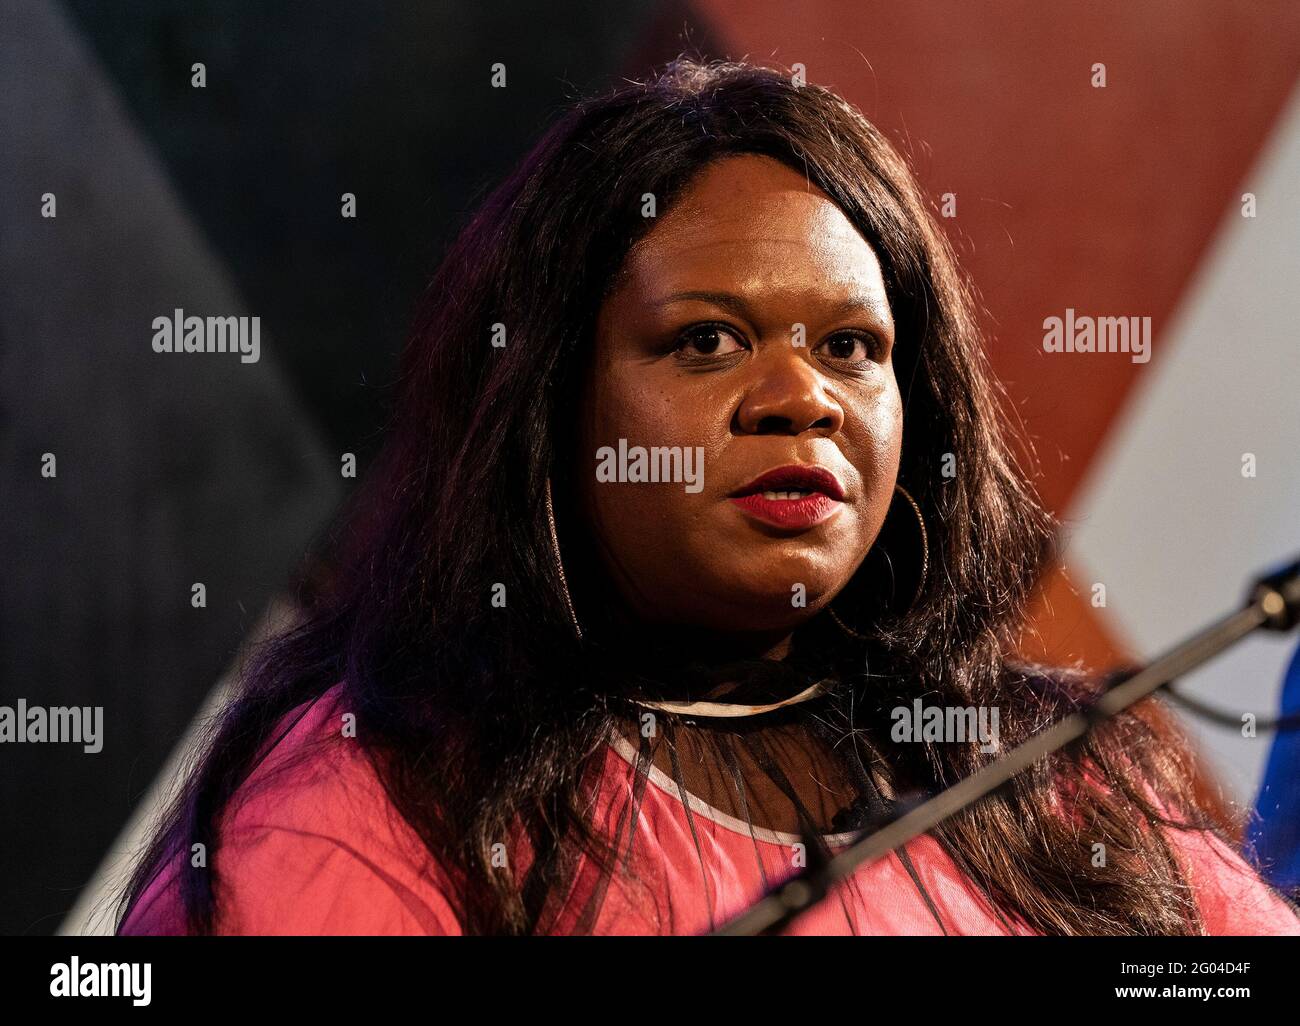 New York, United States. 31st May, 2021. Comedian Yamaneika Saunders speaks at Carolines on Broadway comedy club re-opening after pandemic ceremony. Senator Charles Schumer lauded Safe our Stages (SOS) bill passed by Senate to help cultural venues to survive pandemic. He also cracked few jokes saying it is comedy club he does not have a choice but say them. (Photo by Lev Radin/Pacific Press) Credit: Pacific Press Media Production Corp./Alamy Live News Stock Photo